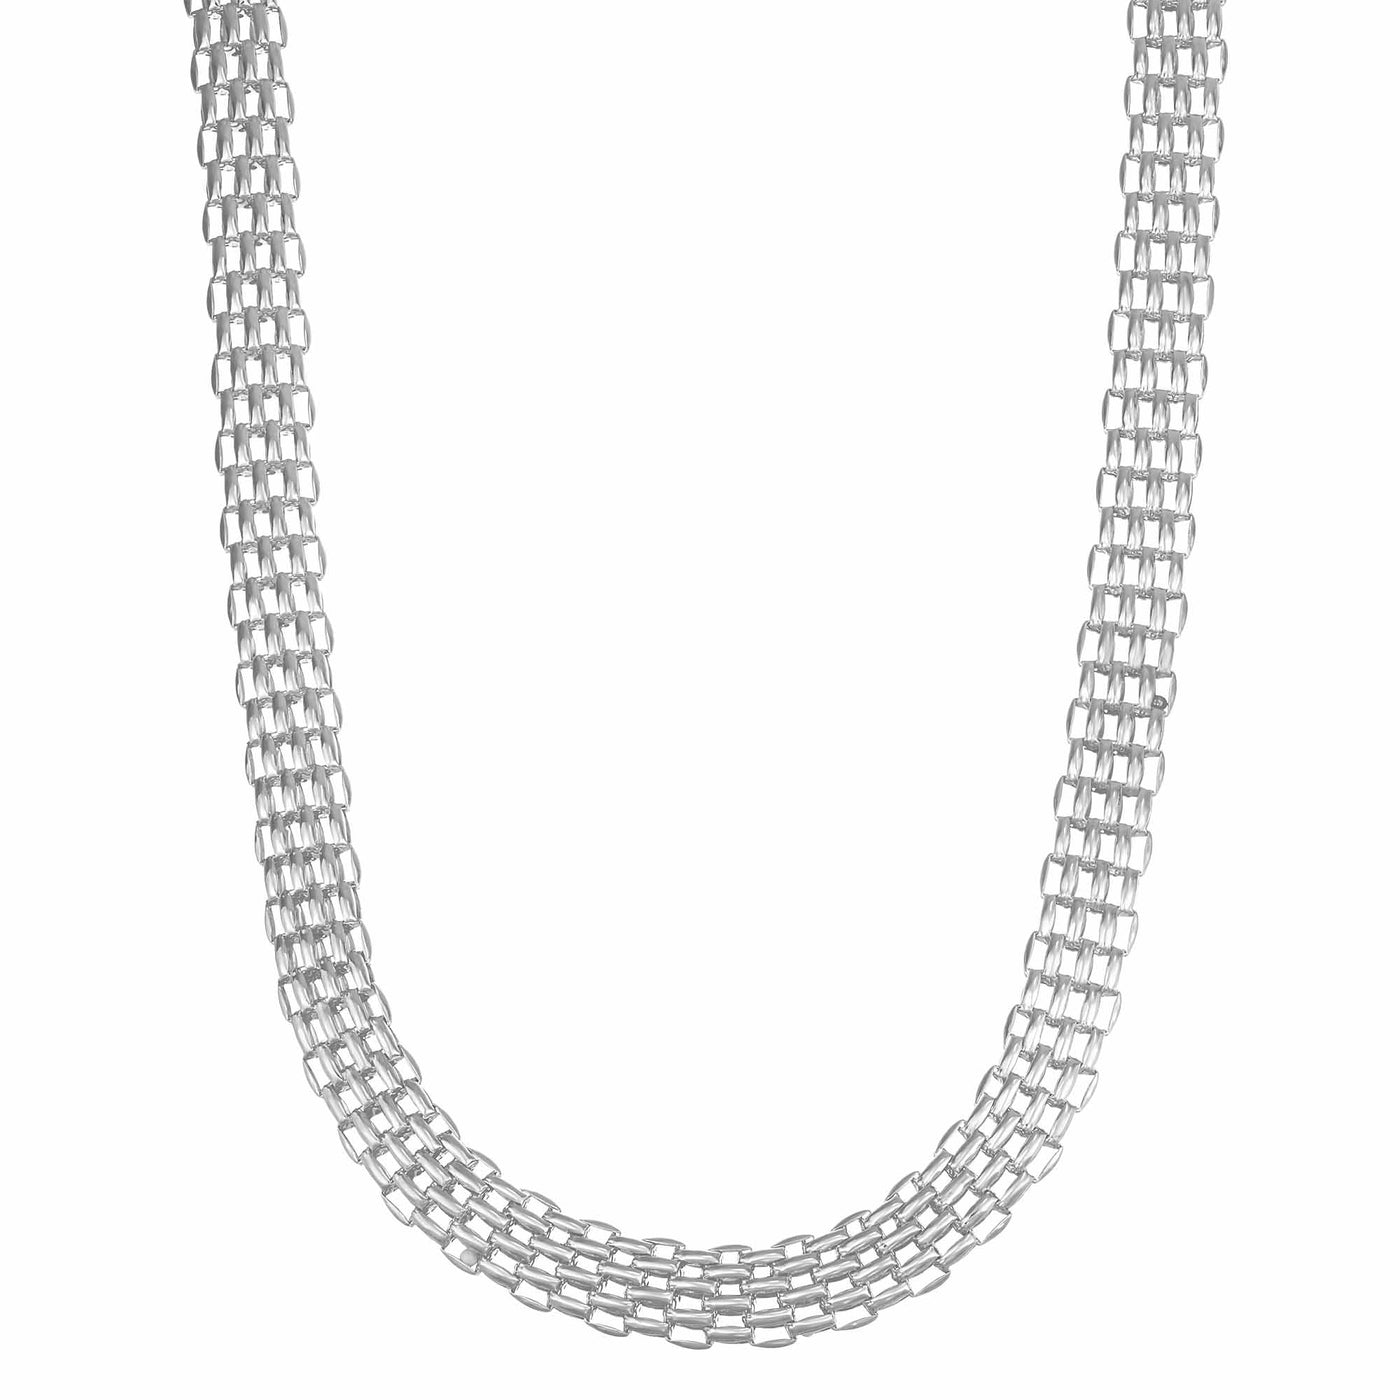 Rebecca Sloane Silver Popcorn Chain Necklace with Spring Ring